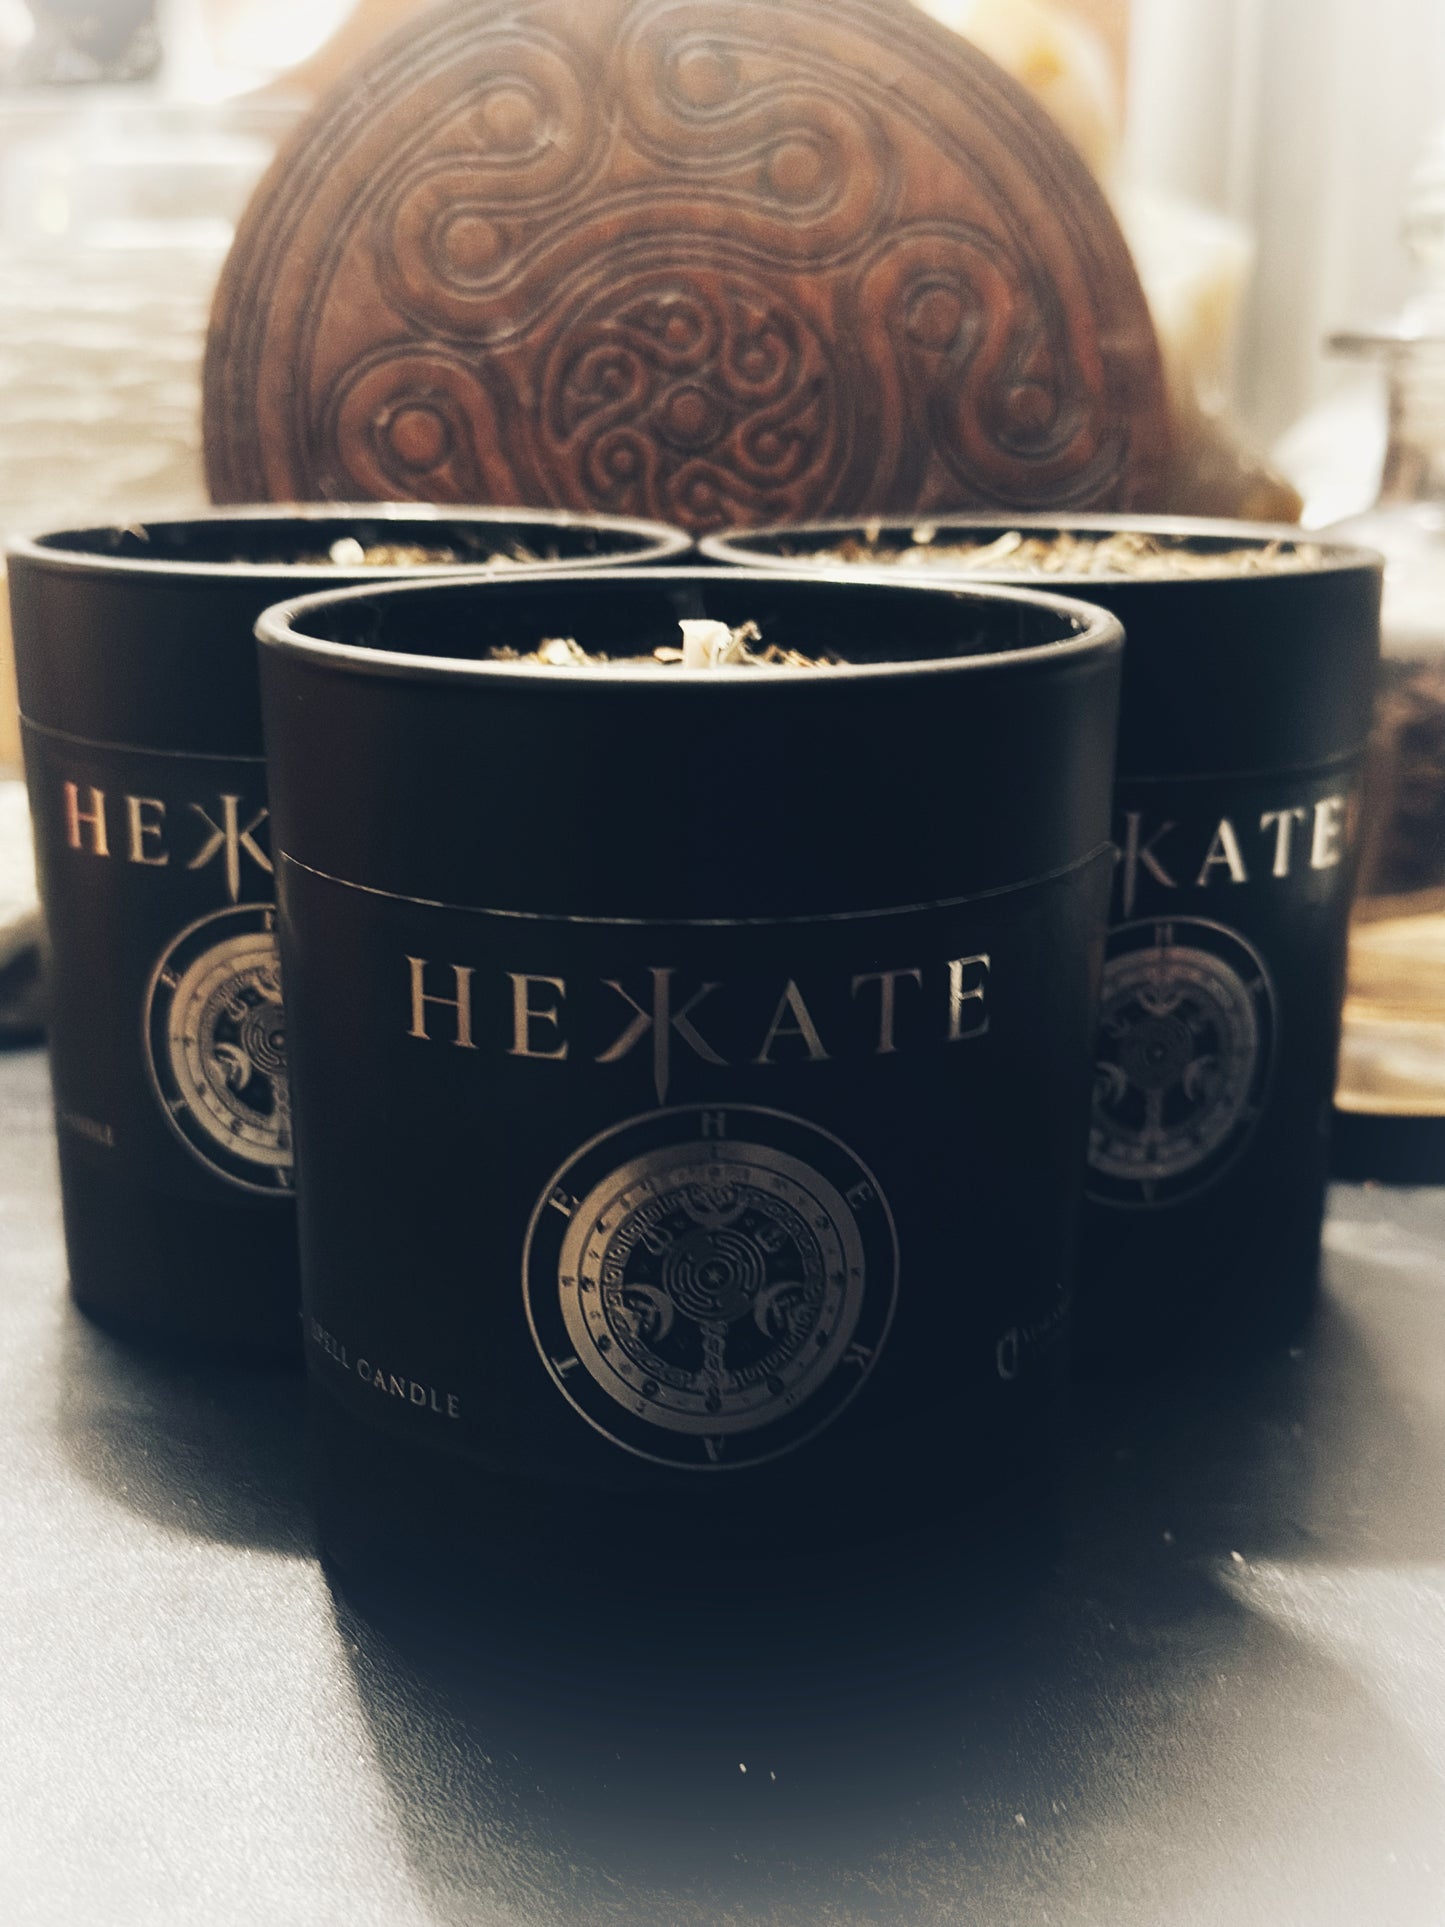 HEKATE RITUAL SPELL CANDLE